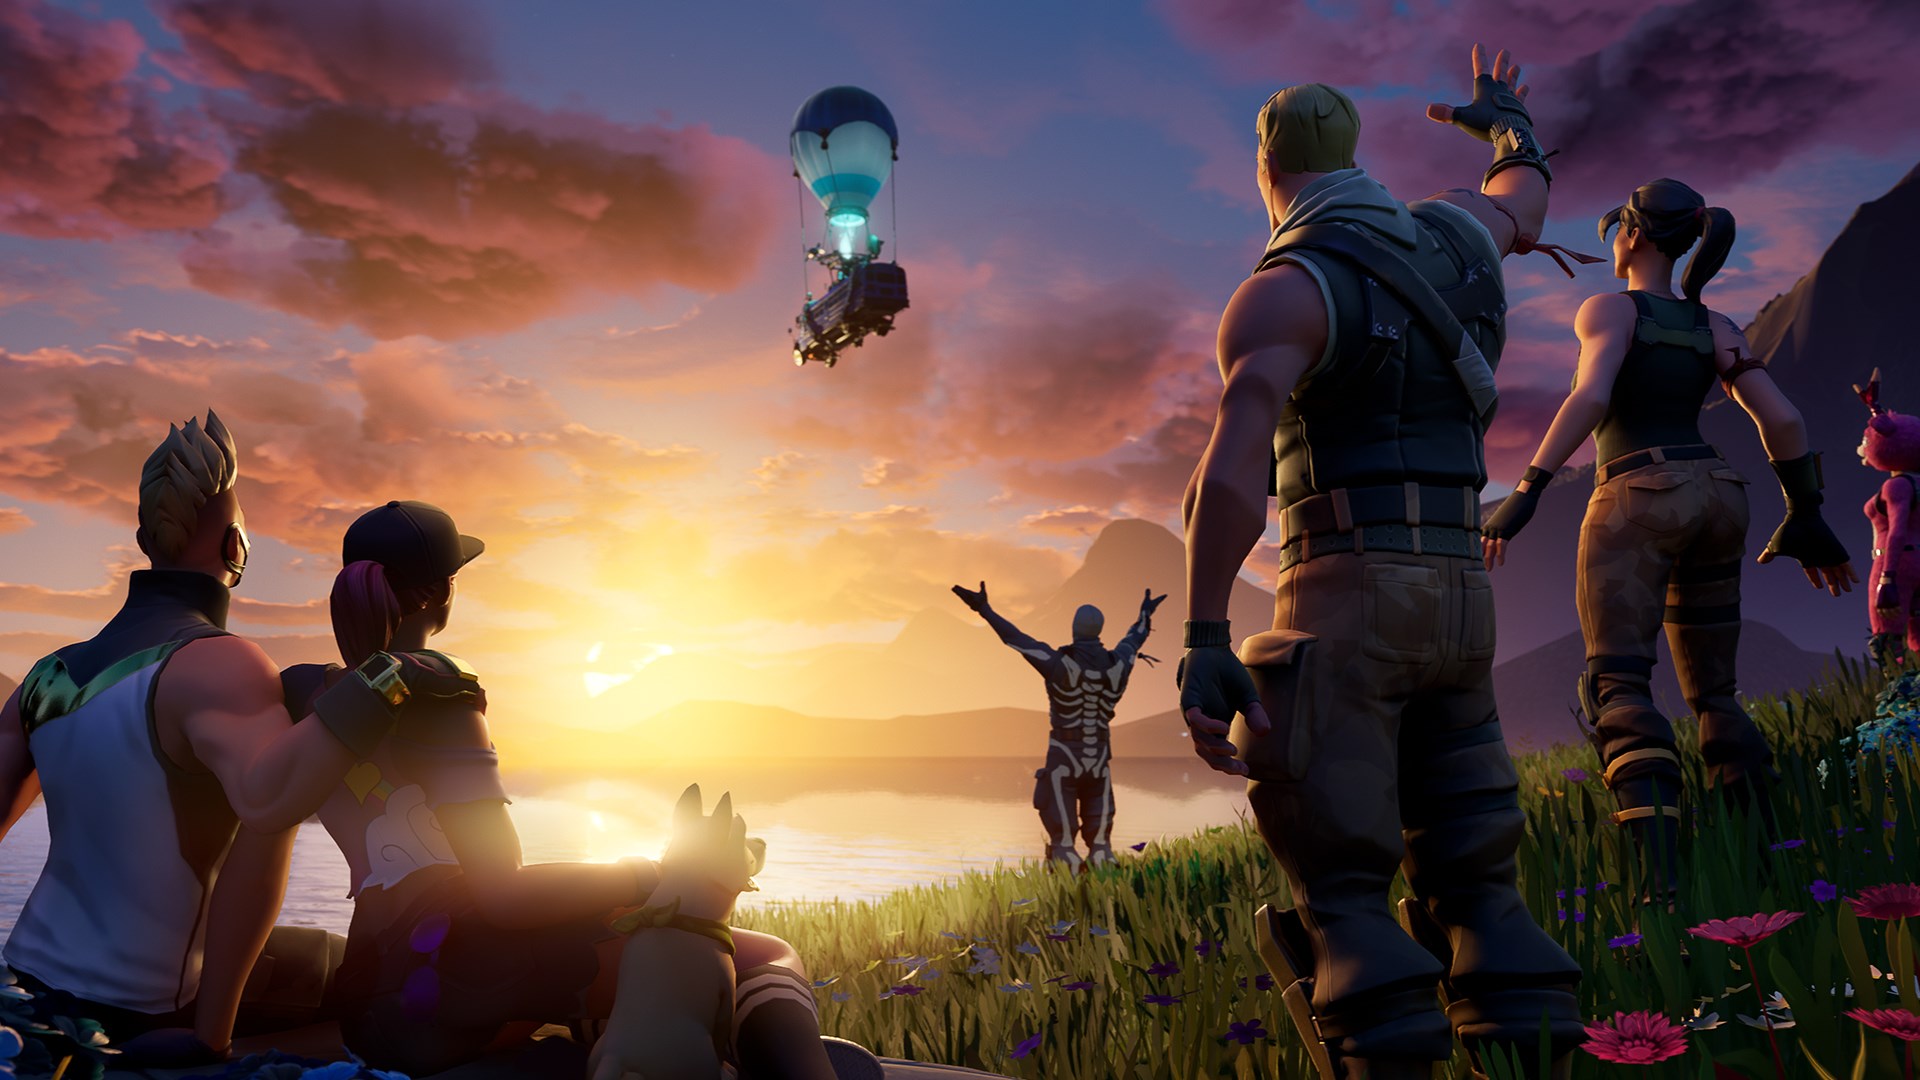 Fortnite Chapter 2 Leaked As Part of a New Season 11 Update